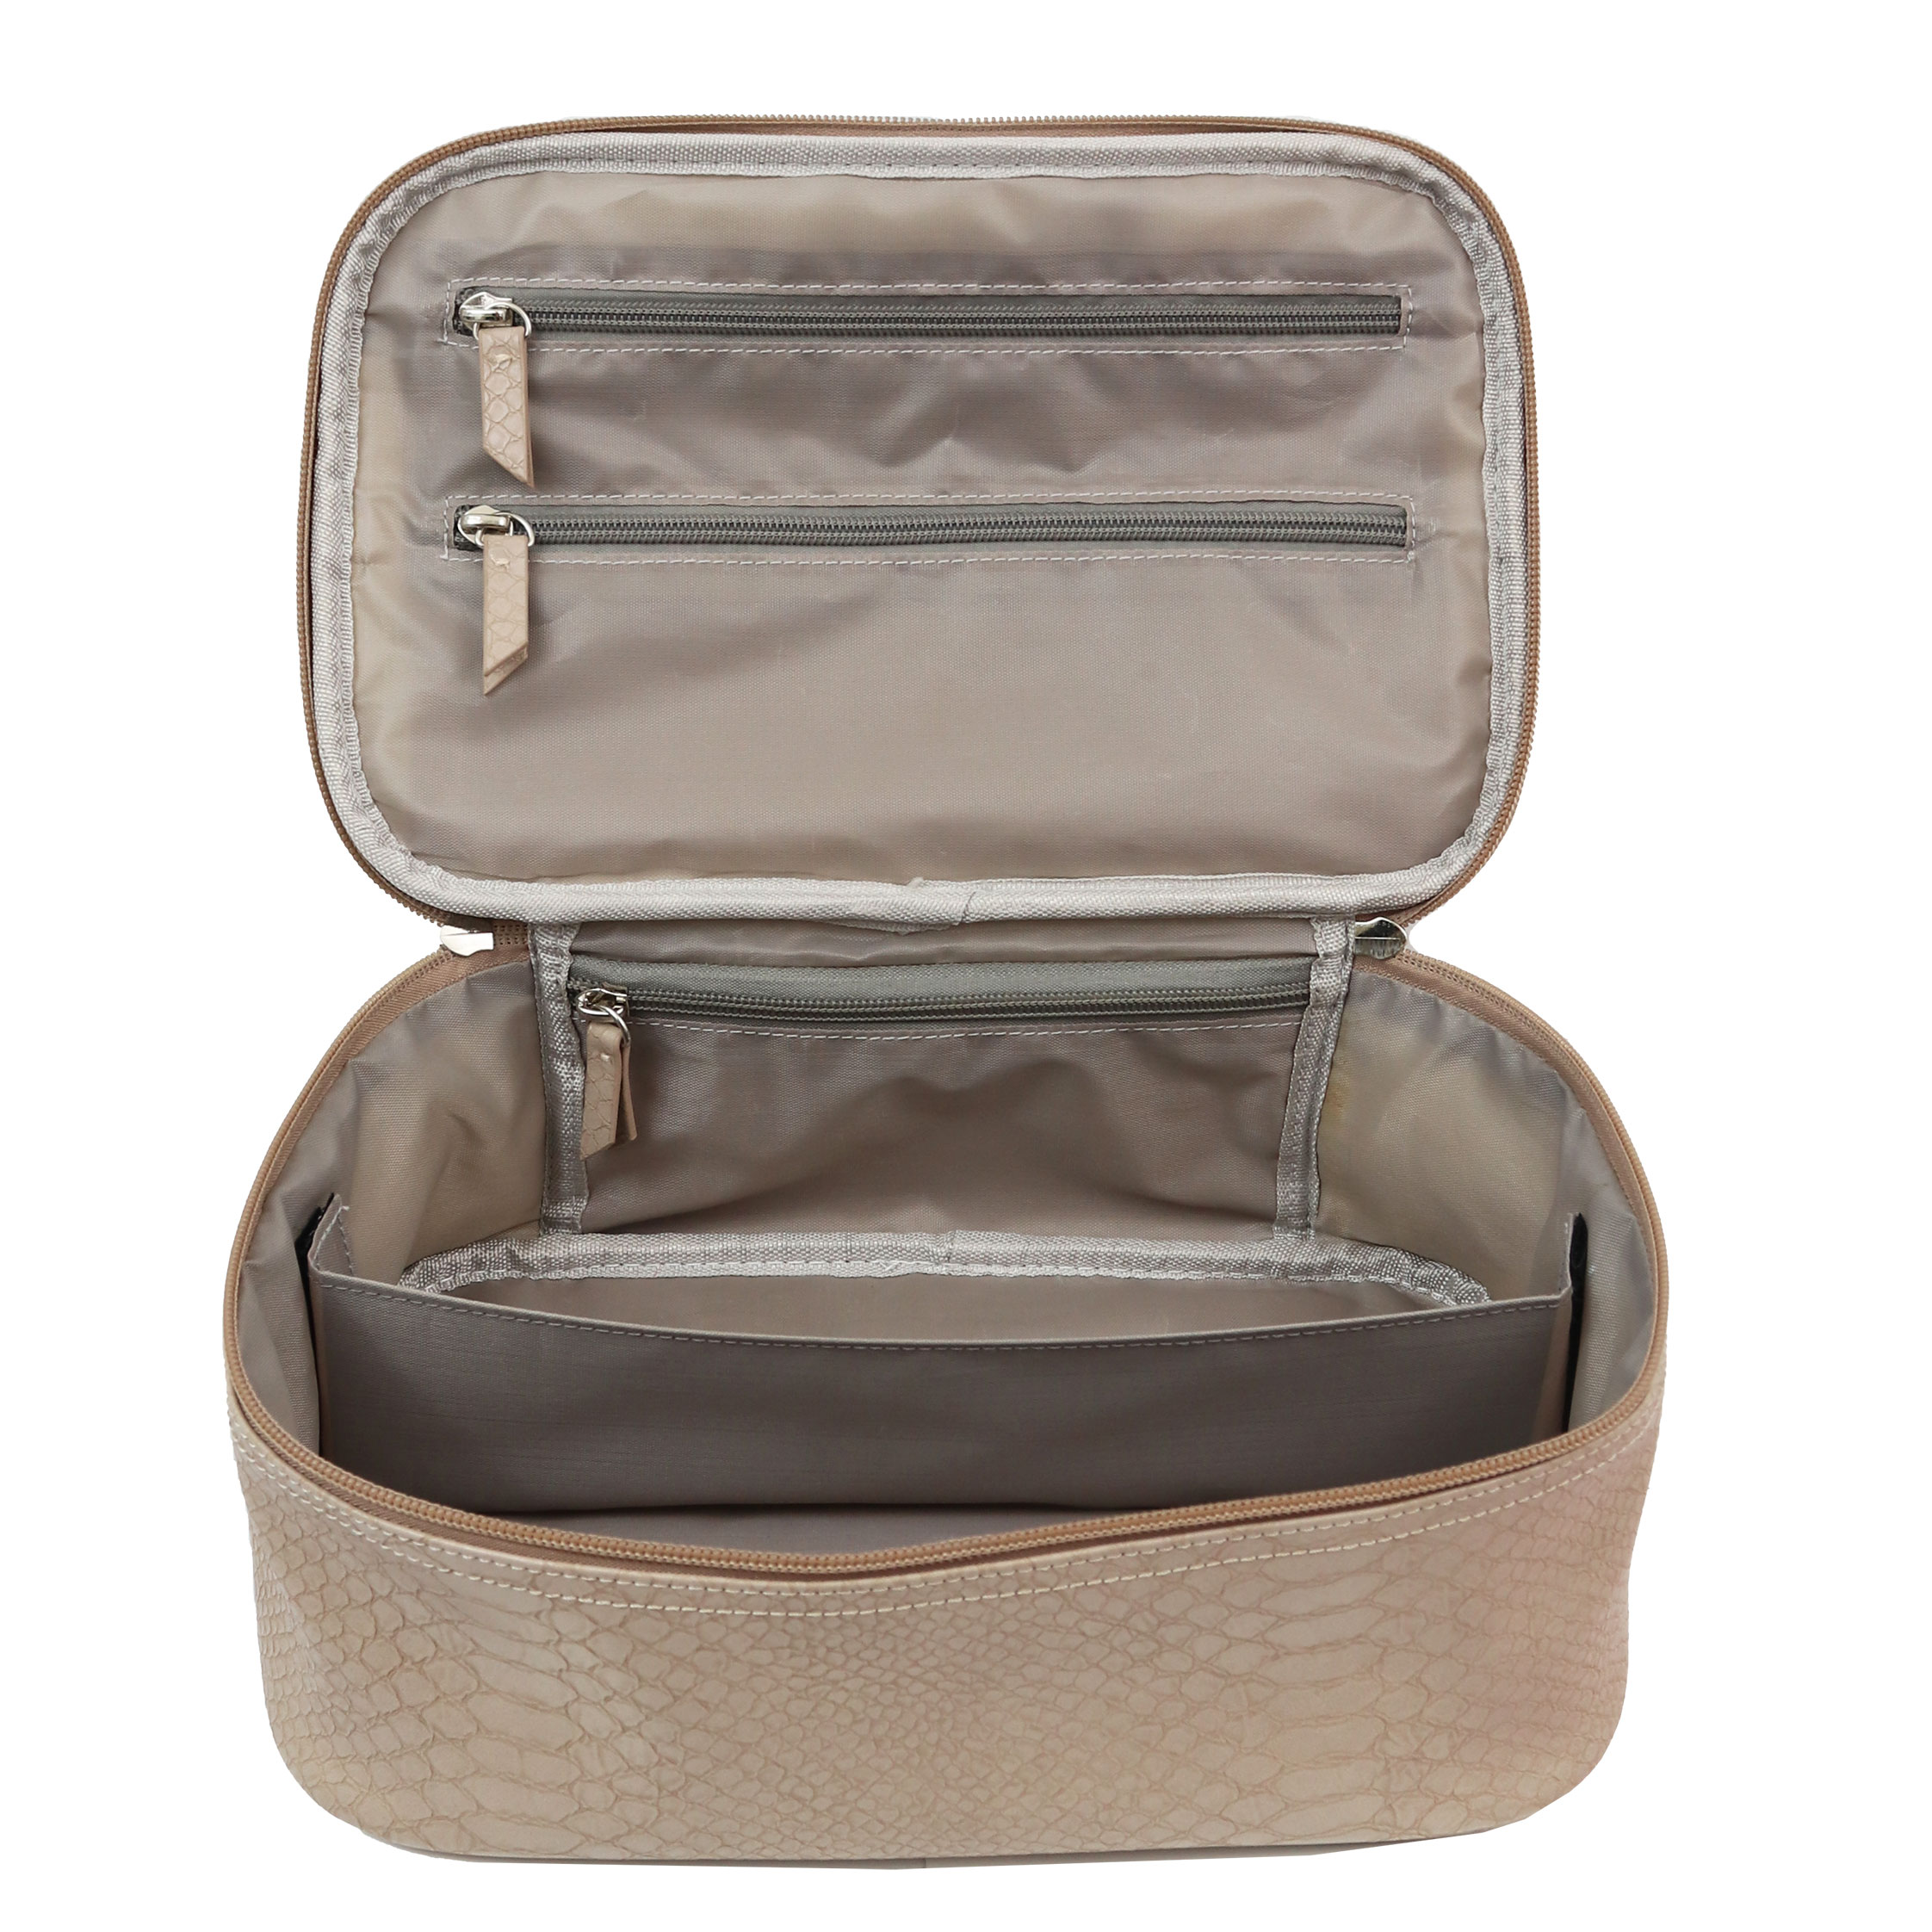 Moc croc natural medium beauty case - Wicked Sista | Cosmetic Bags ...